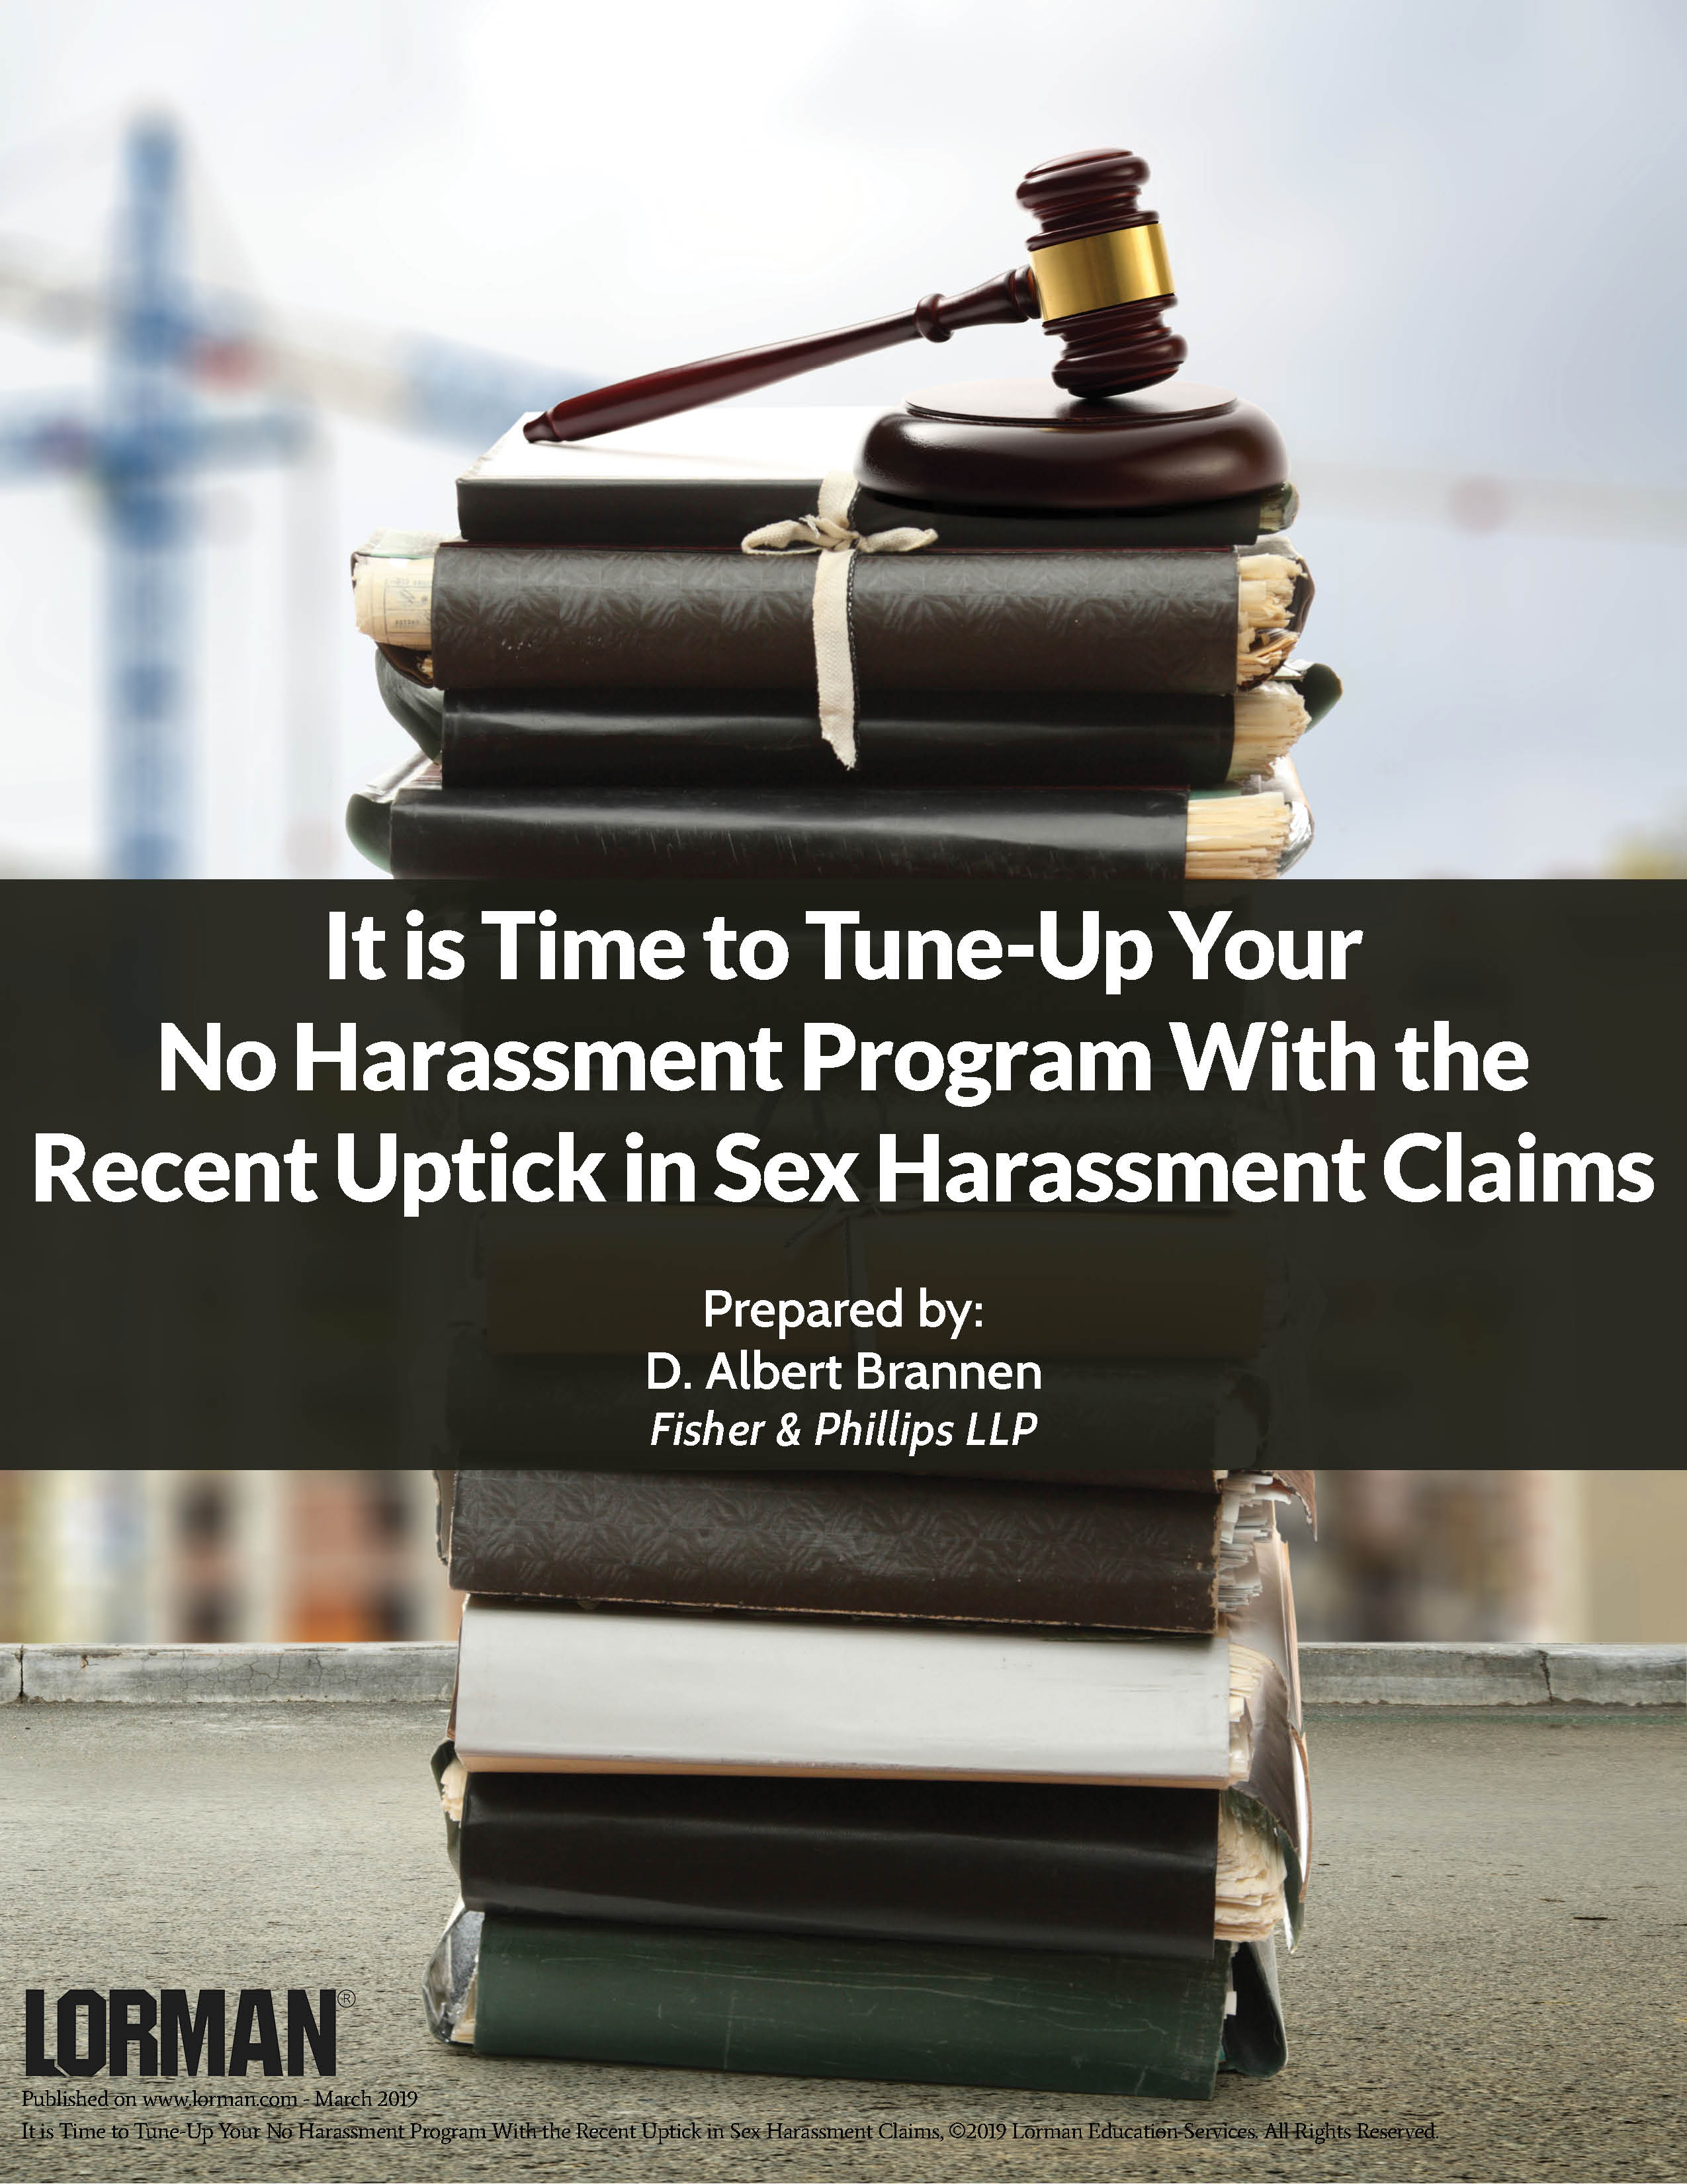 It is Time to Tune-Up Your No Harassment Program With the Recent Uptick in Sex Harassment Claims